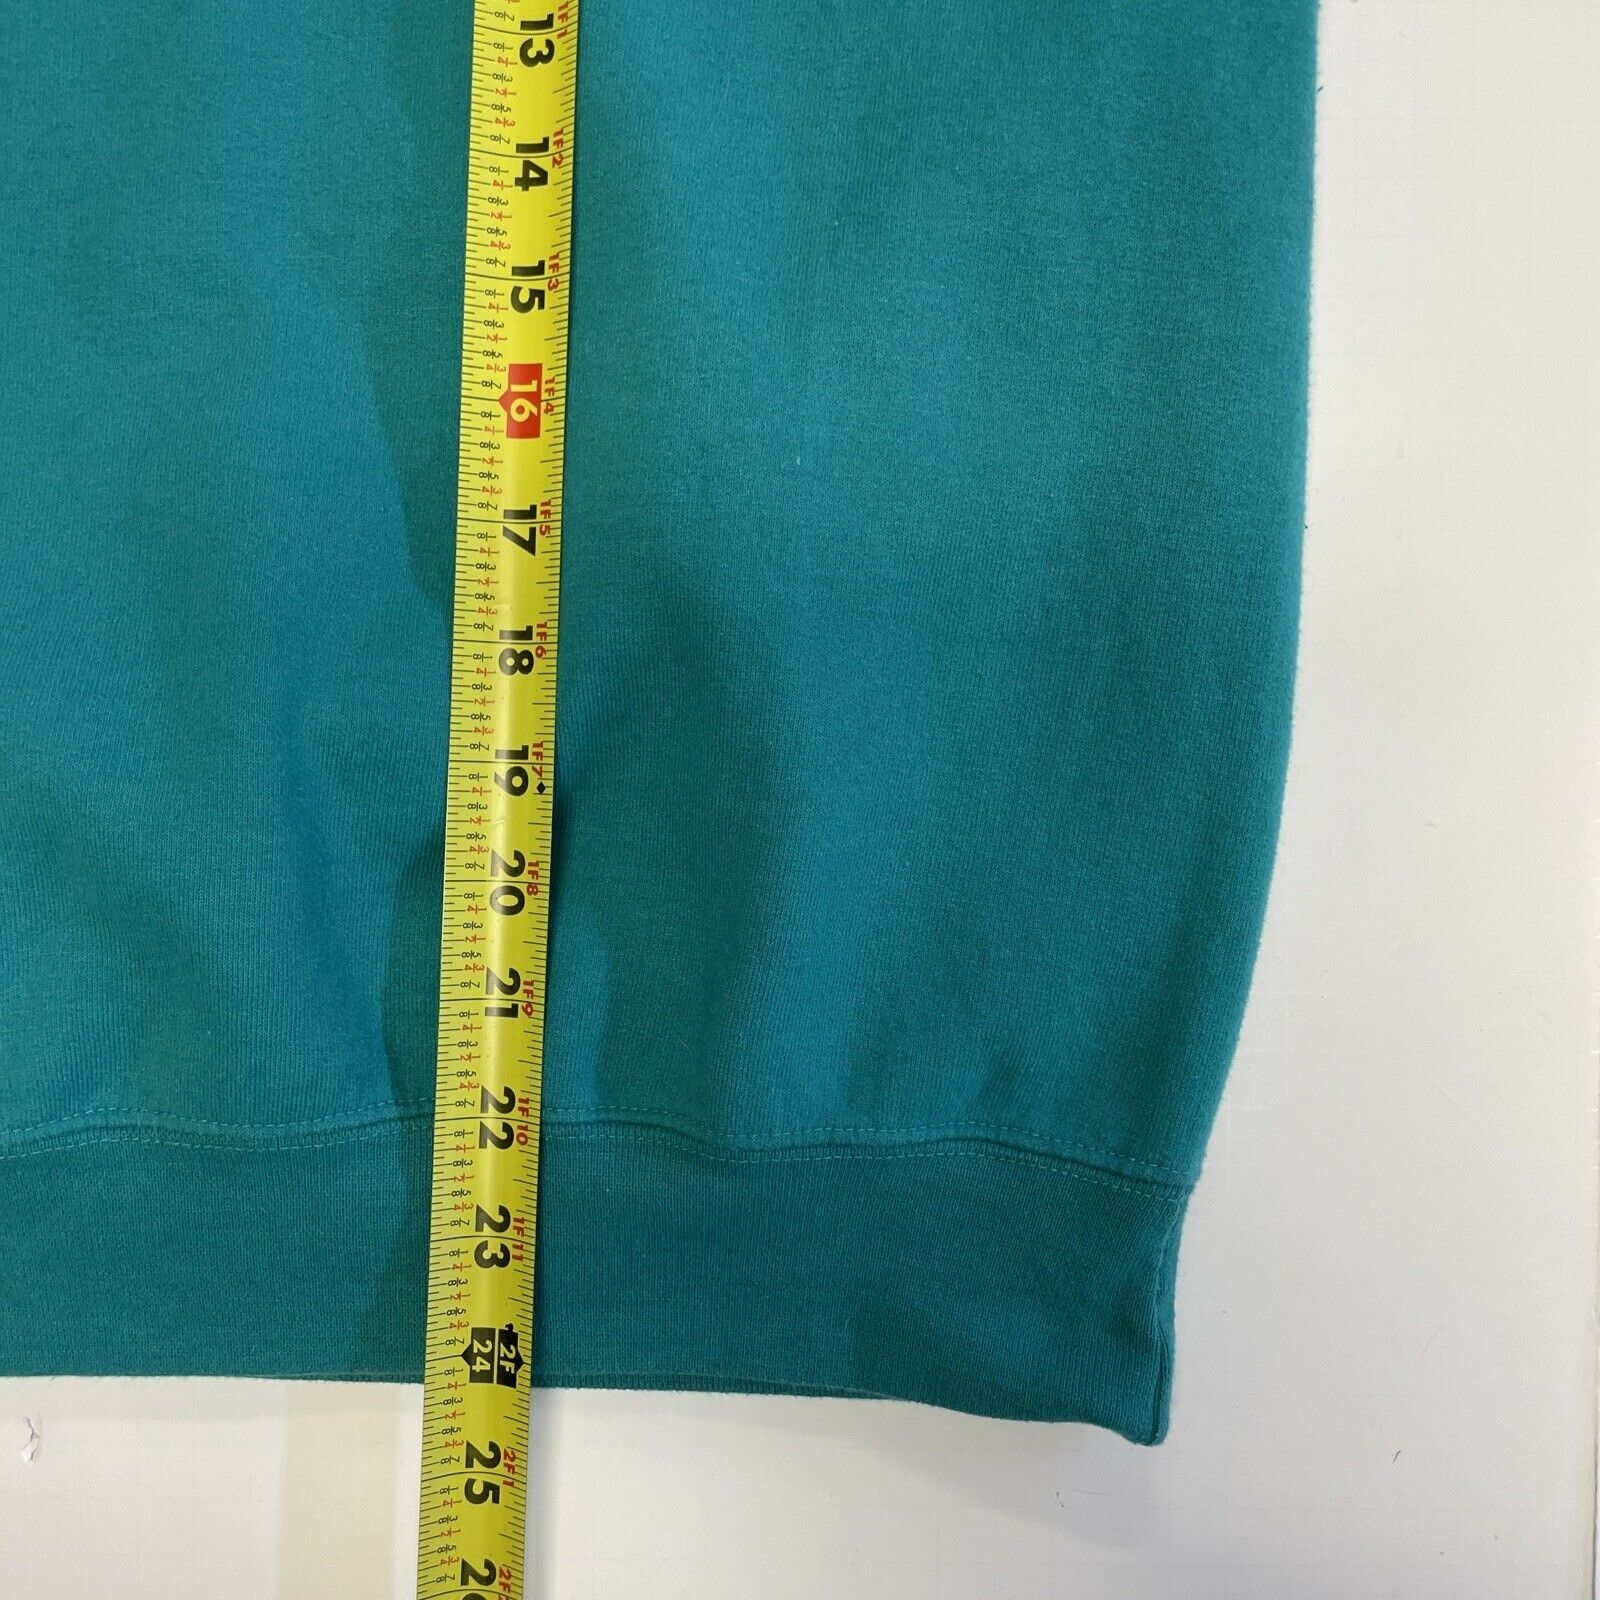 Champion Champion ECO Blank Pullover Sweatshirt Solid Teal Stained M Size US M / EU 48-50 / 2 - 3 Thumbnail